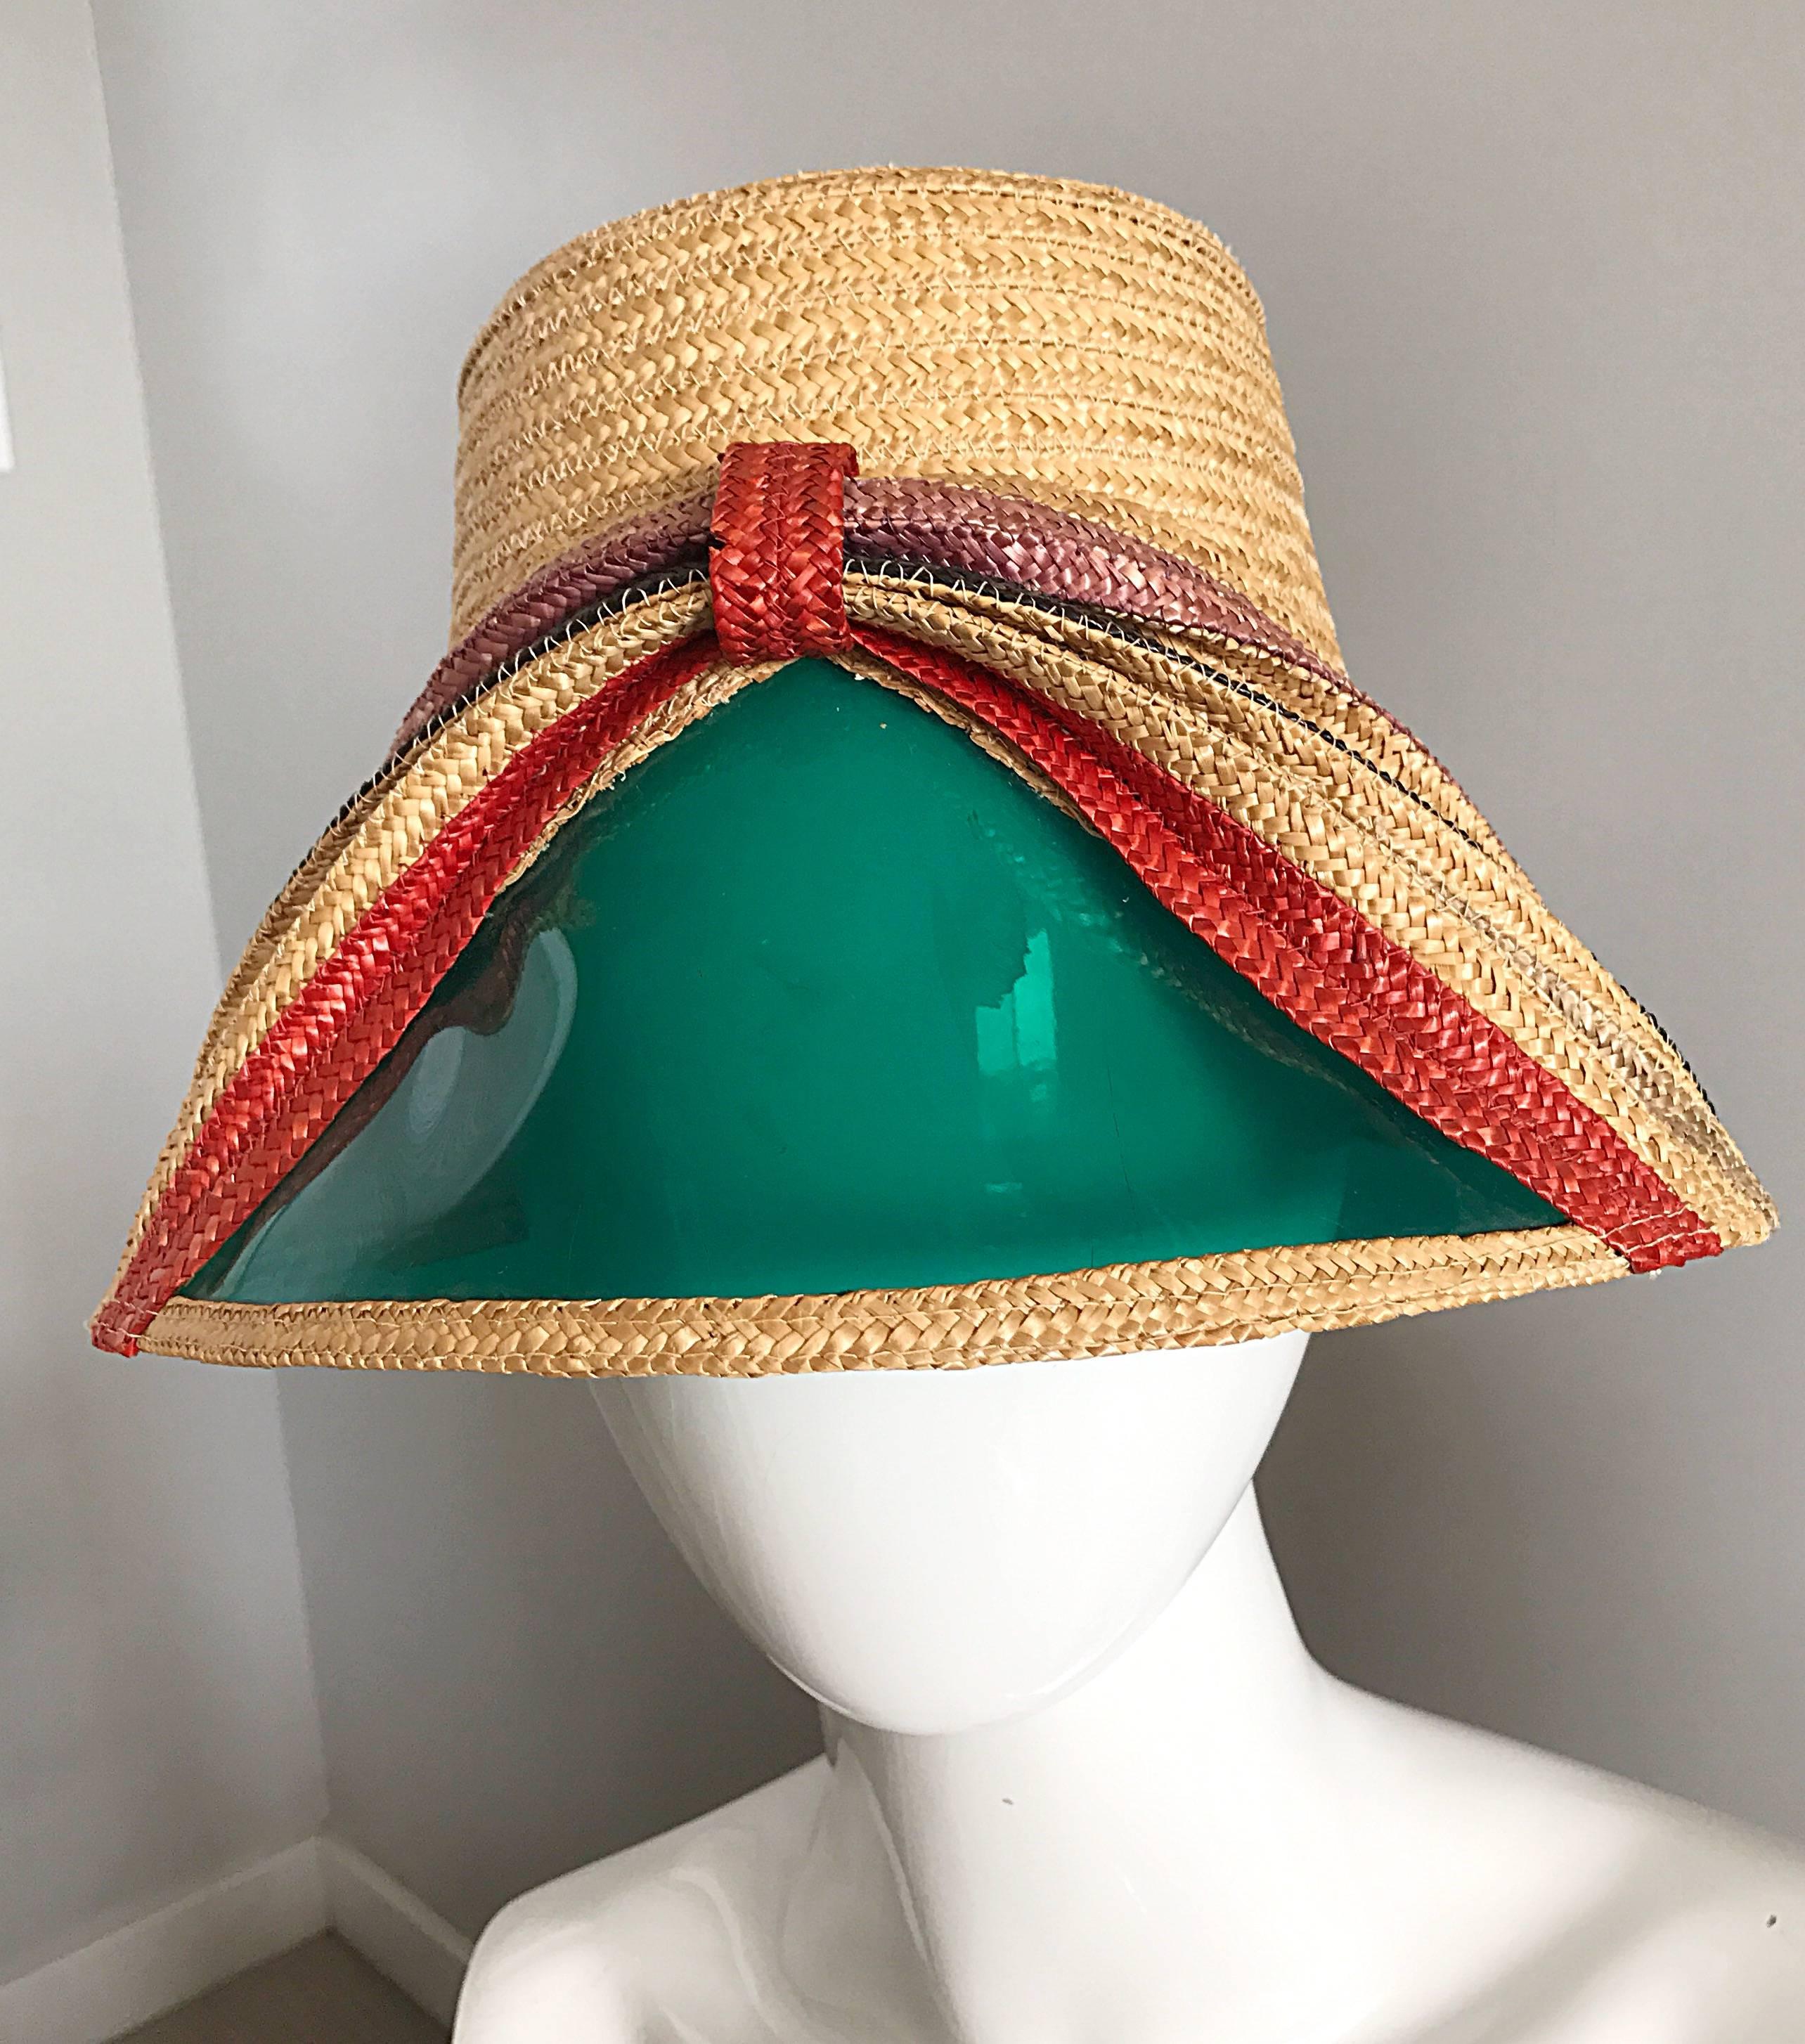 Rare 1960s straw hat with built in sunglasses / visor! Features a bow design in orange, violet, and tan on the front. Teal plastic see-through vinyl panel on the front. This hat is all-in-one! No need to worry about loosing your sunglasses with this